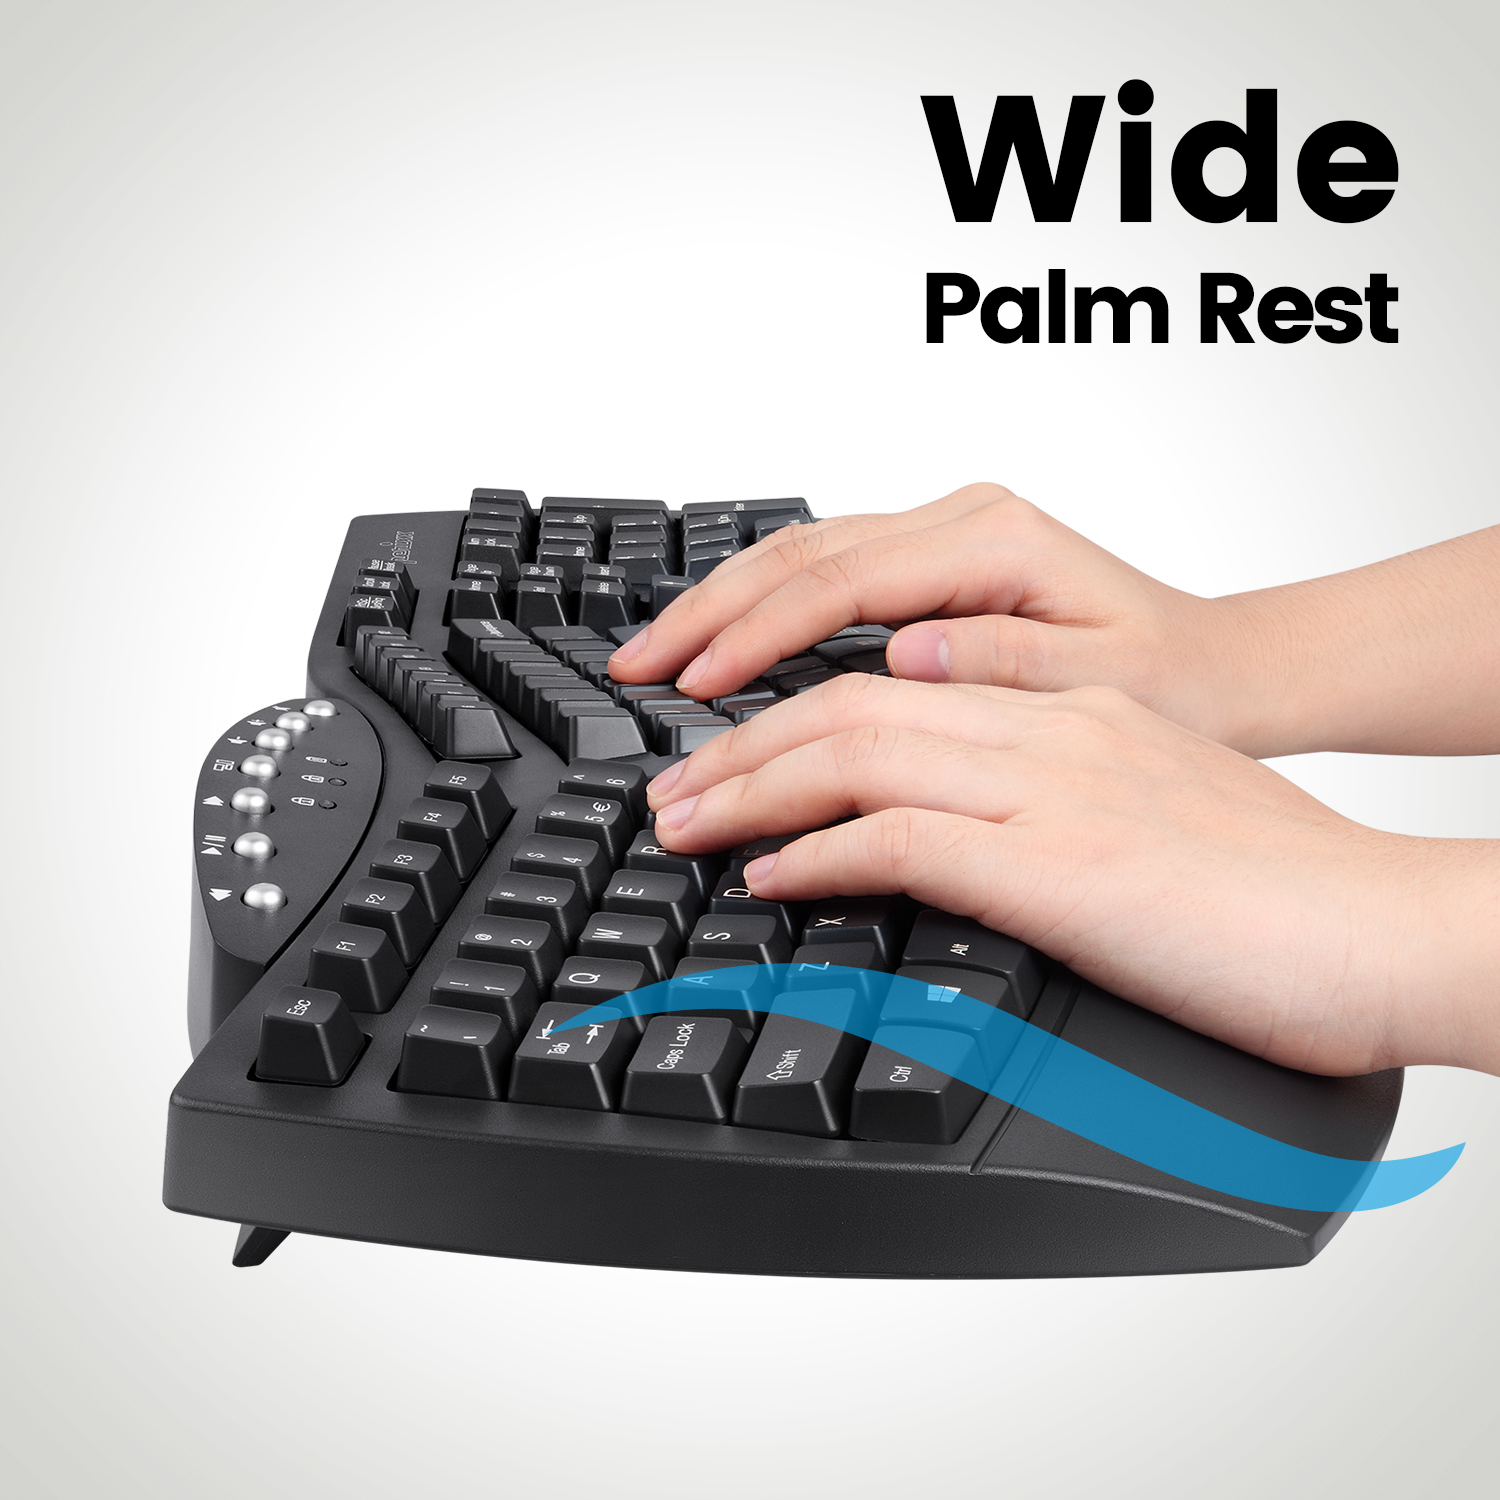 Integrated Palm Rest